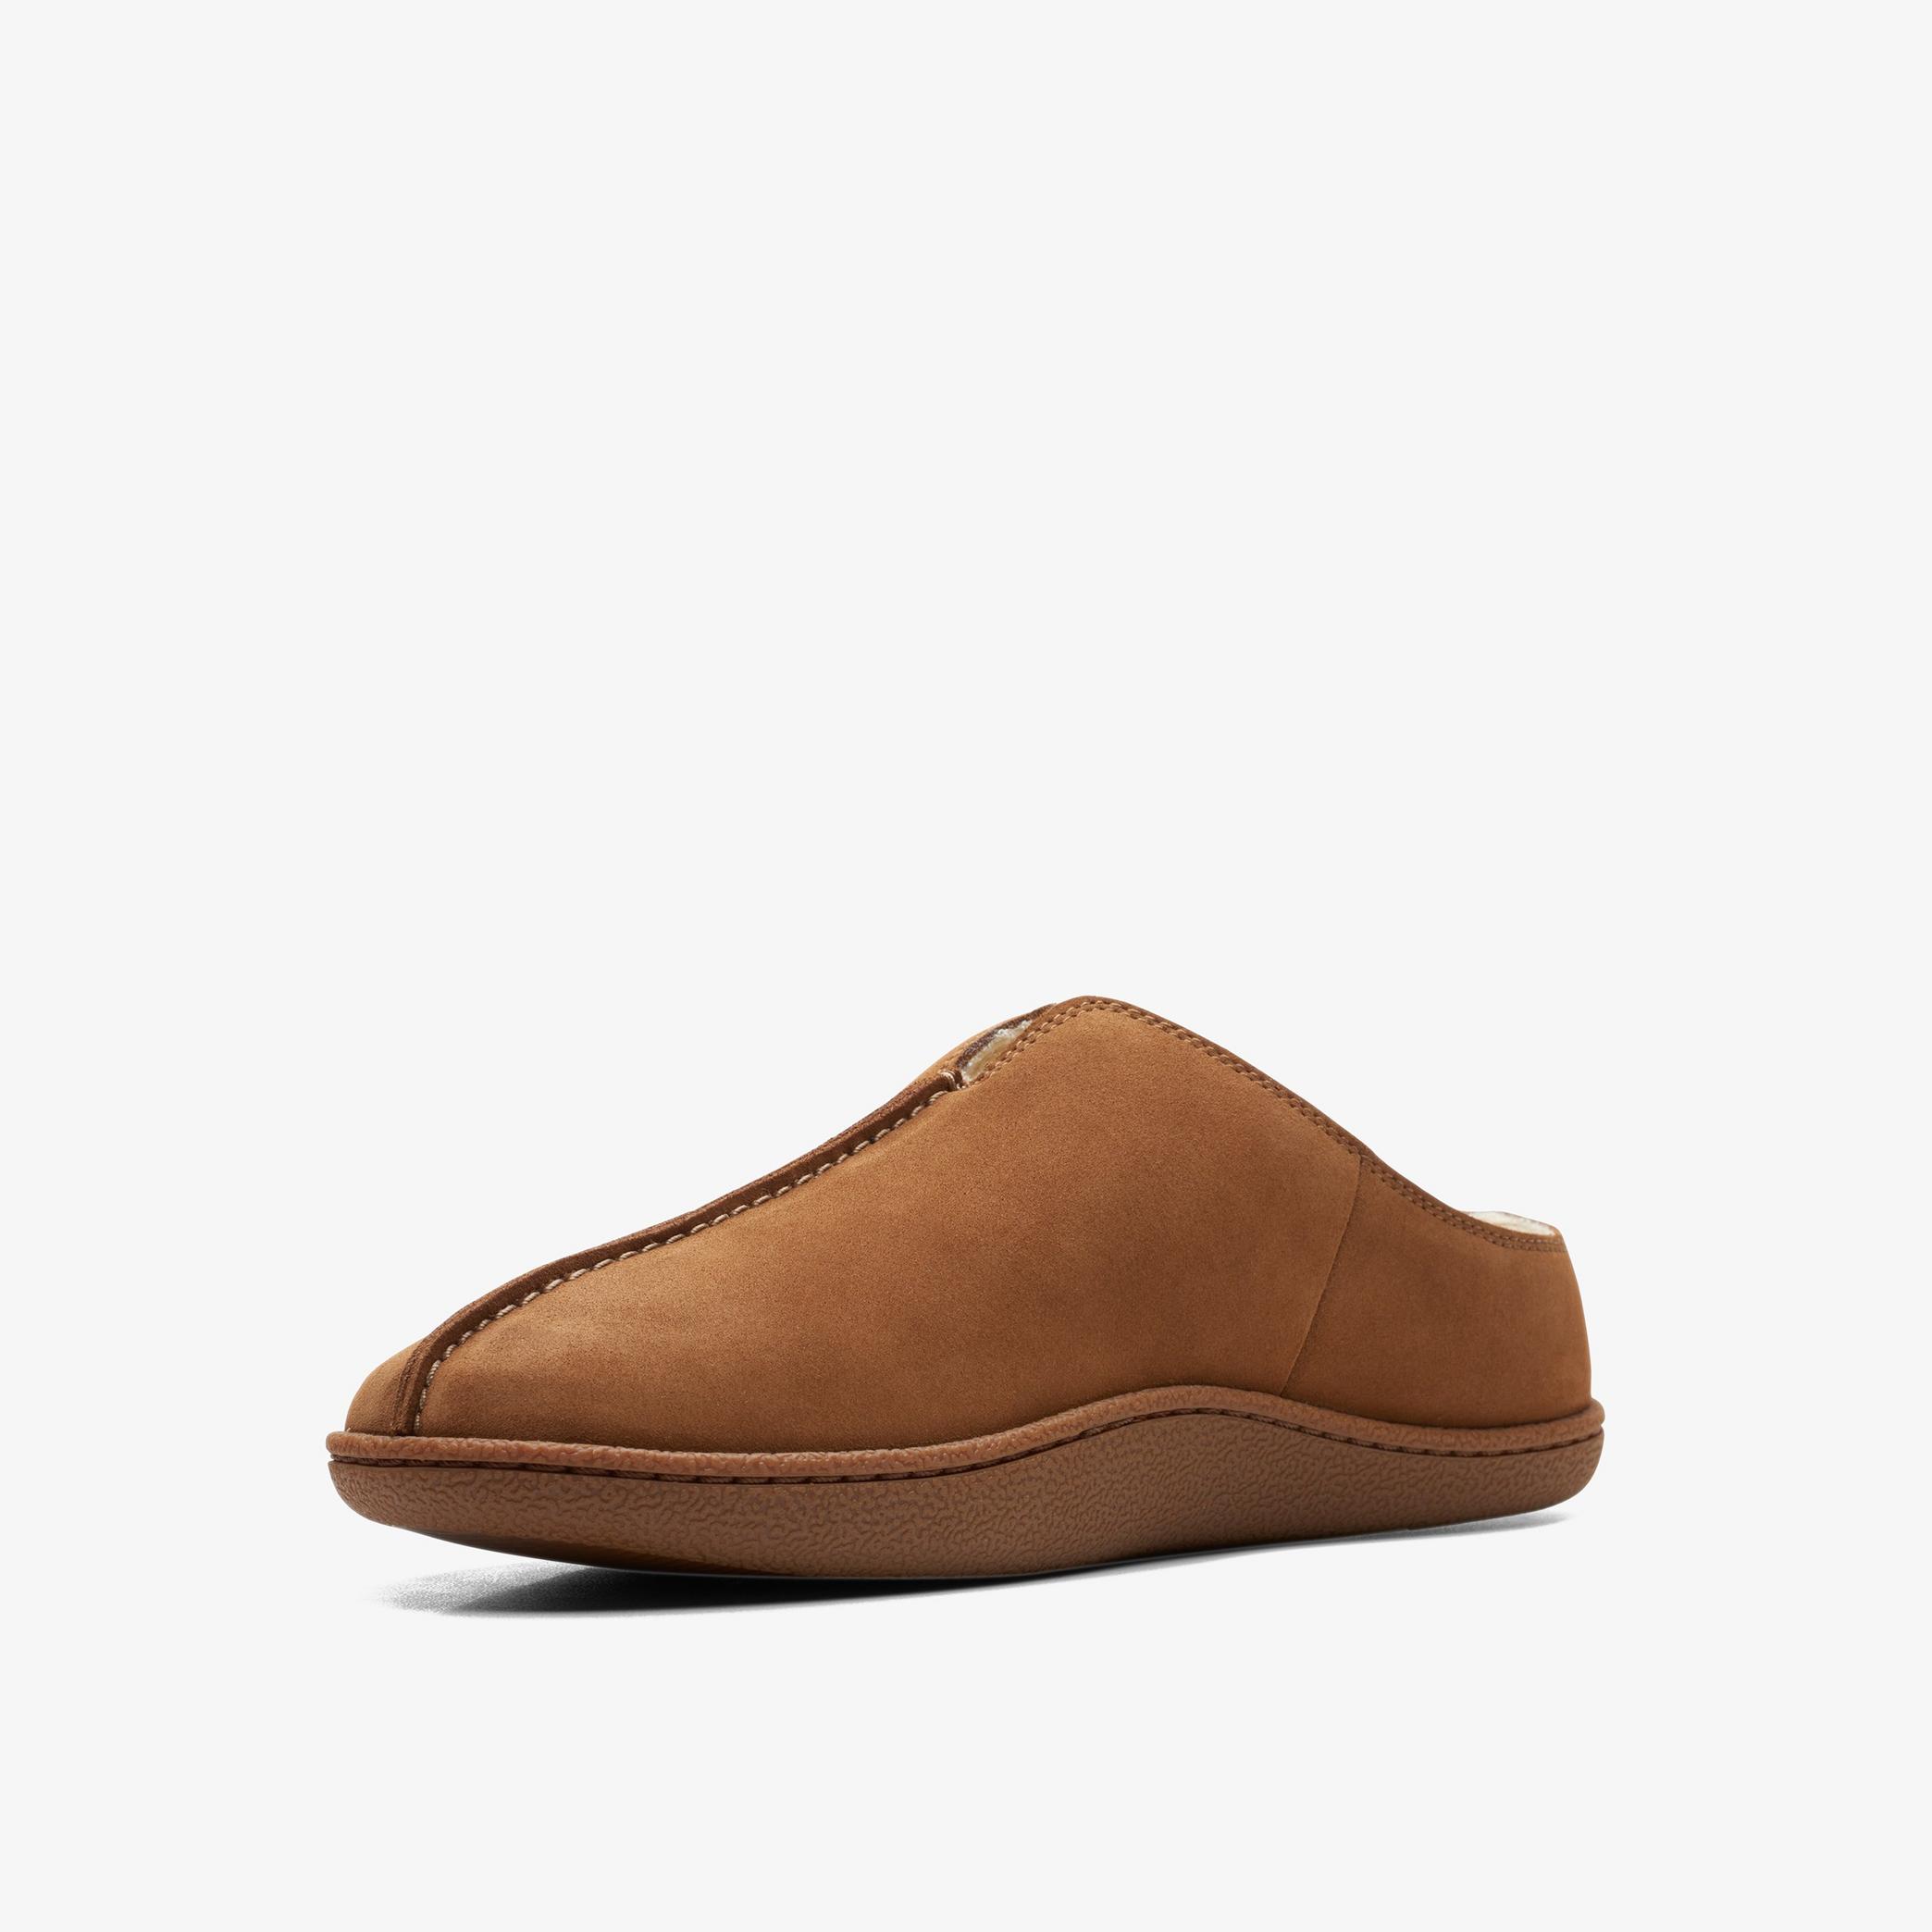 Home Mule Tan Suede Slippers, view 4 of 6